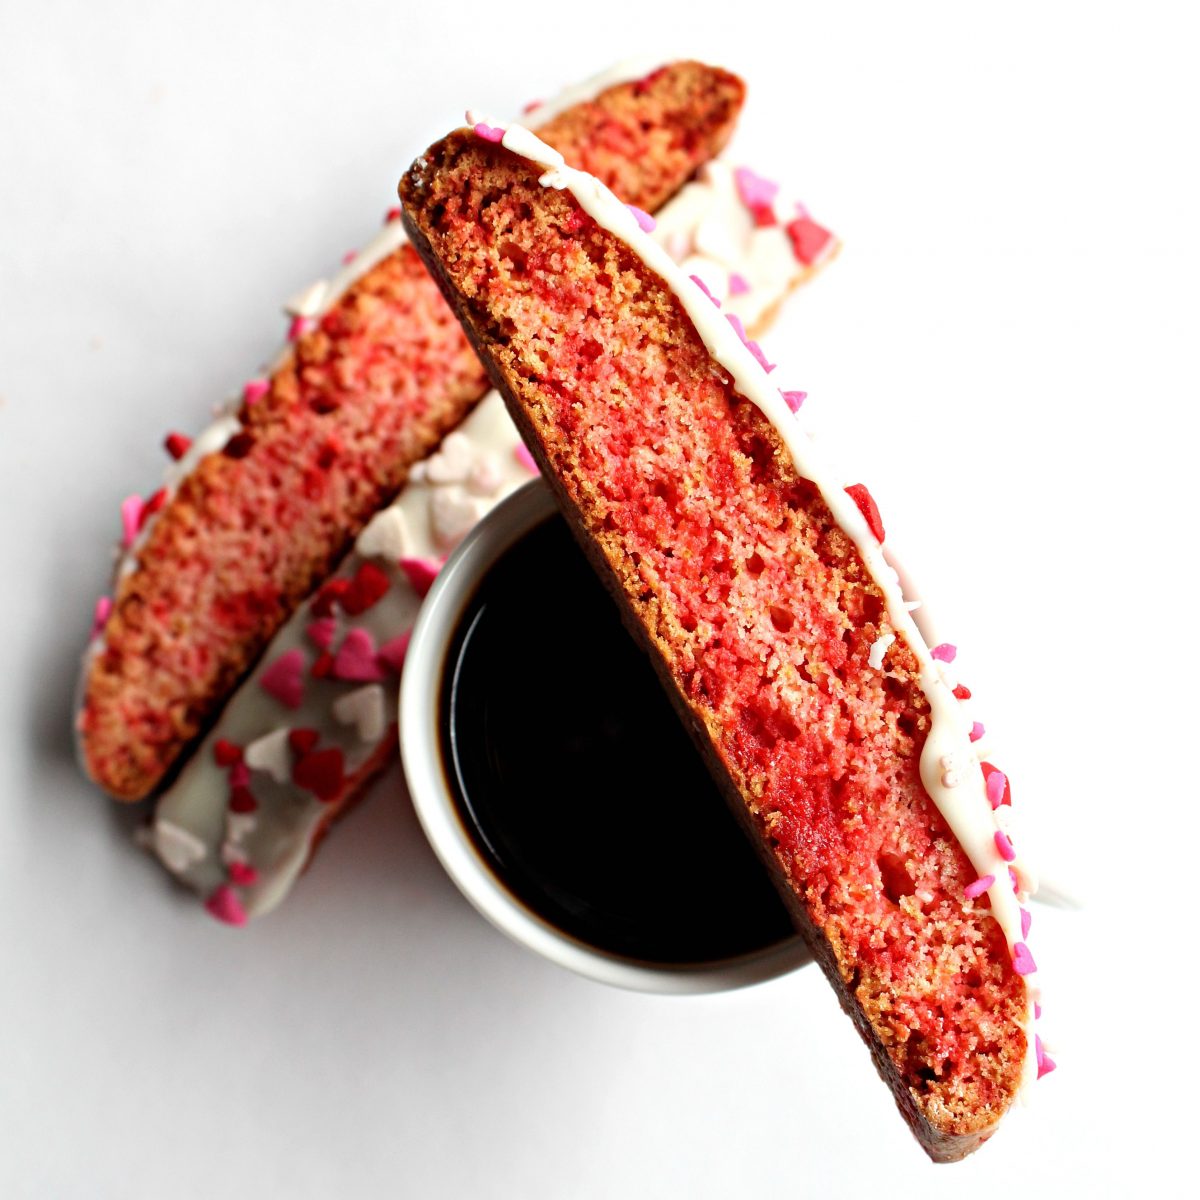 Pink and red biscotti balanced on top of an espresso mug.